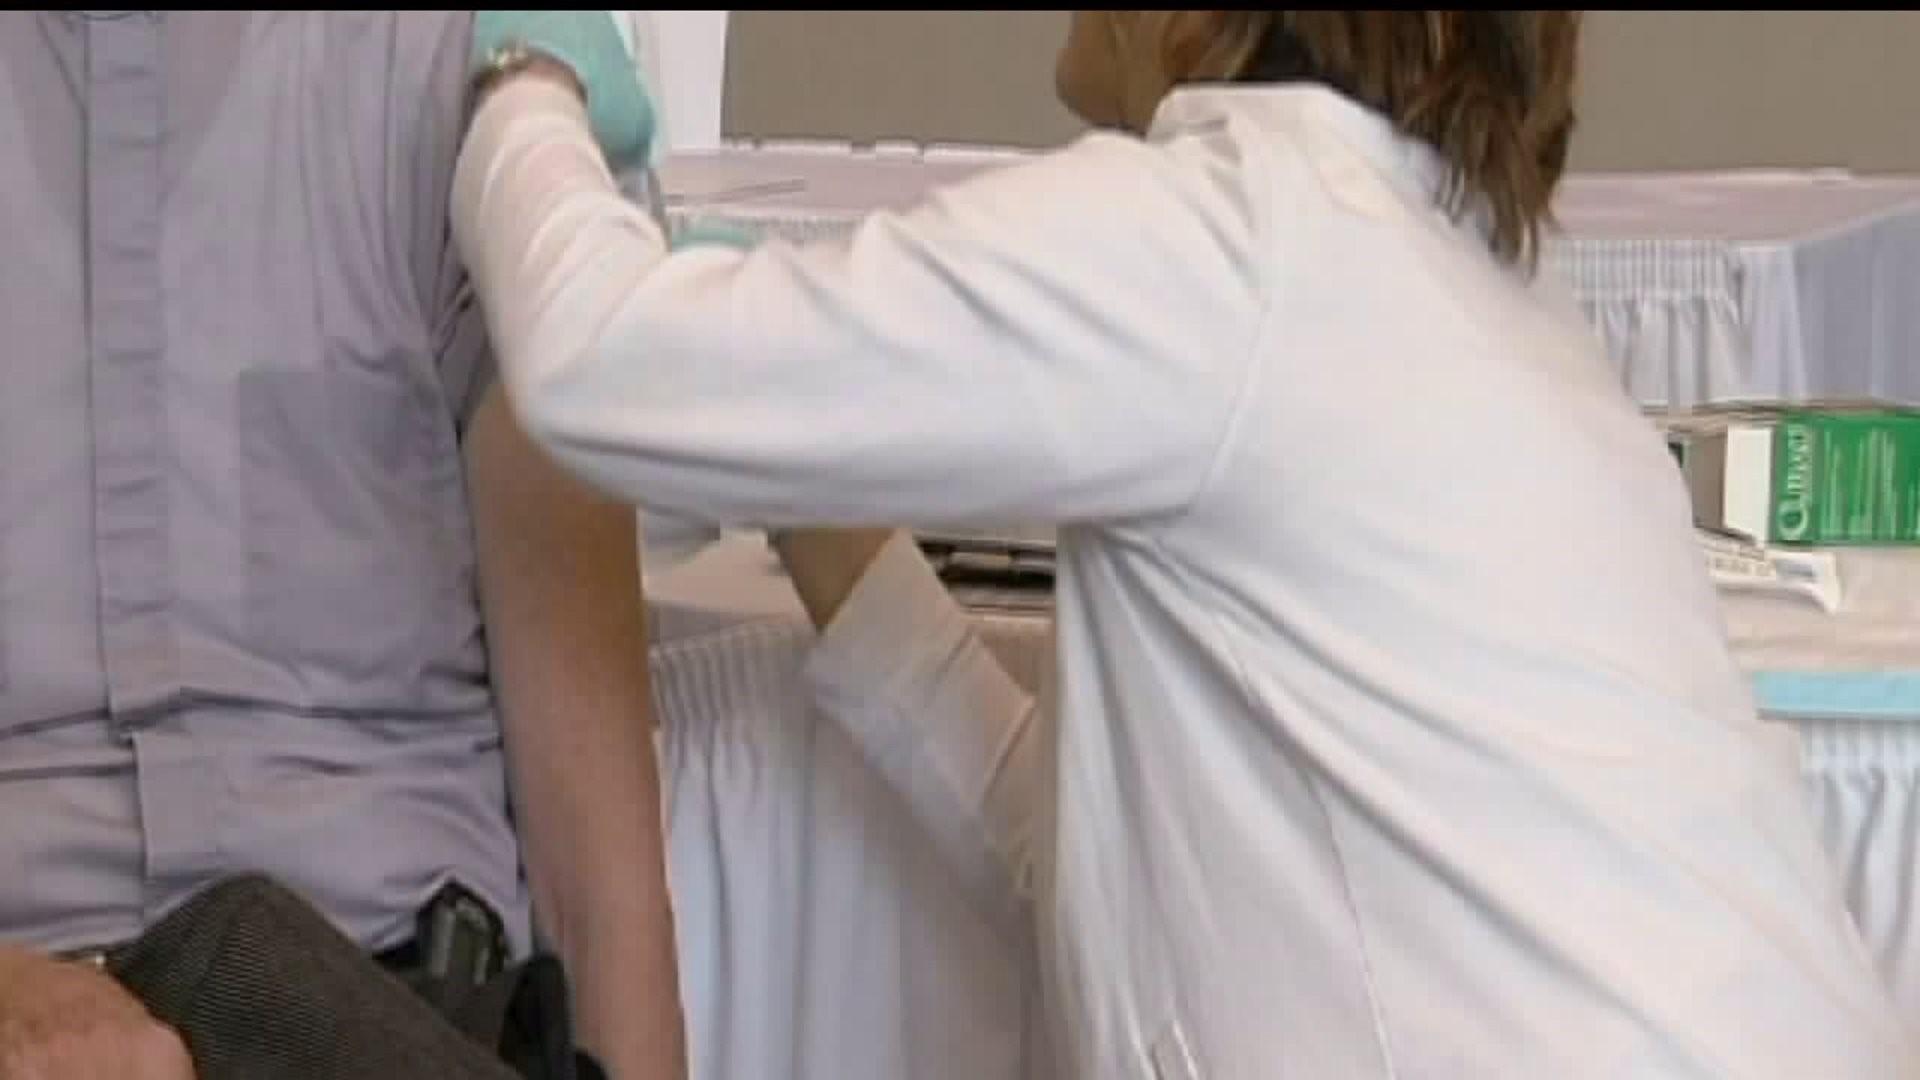 The state is offering free fly vaccine clinics over the next few weeks, one of which is on East Market Street in York County